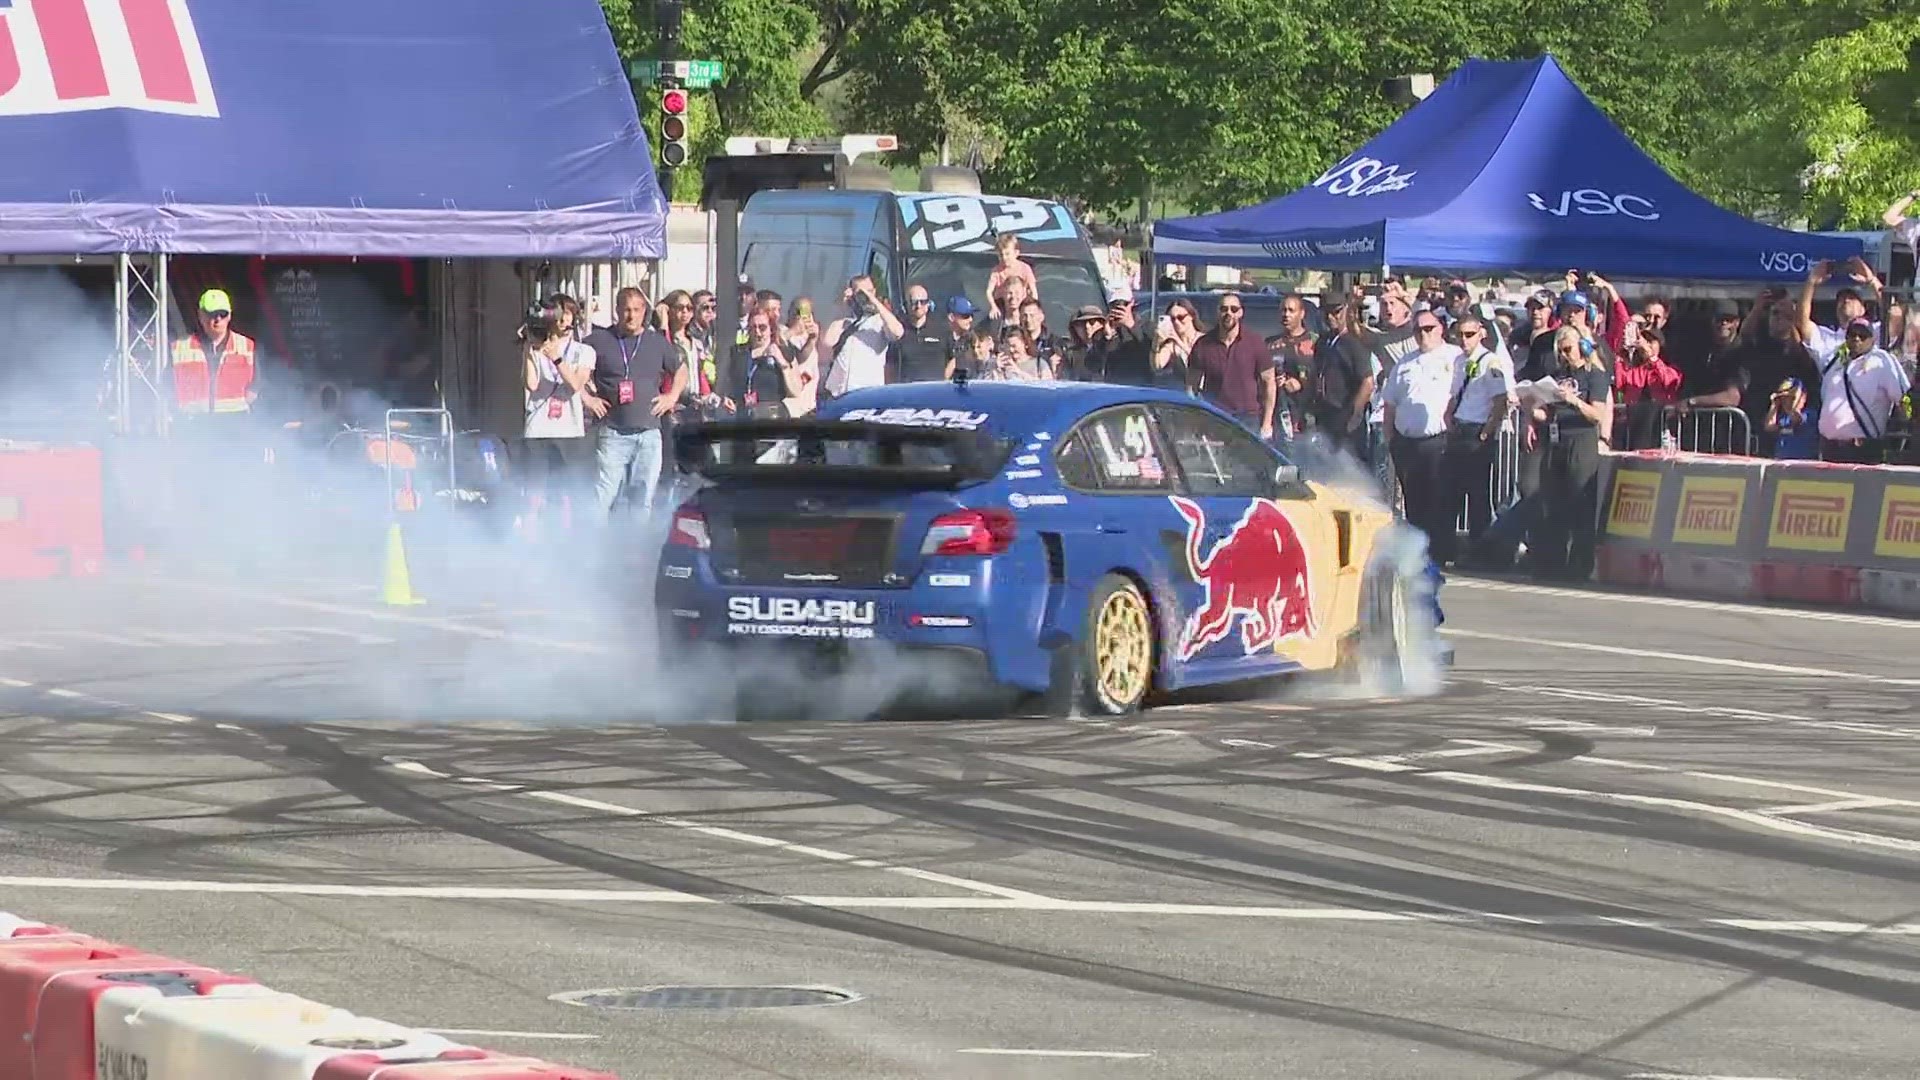 Organizers from Red Bull Racing called the event a success – so could we see more events like this in the District?